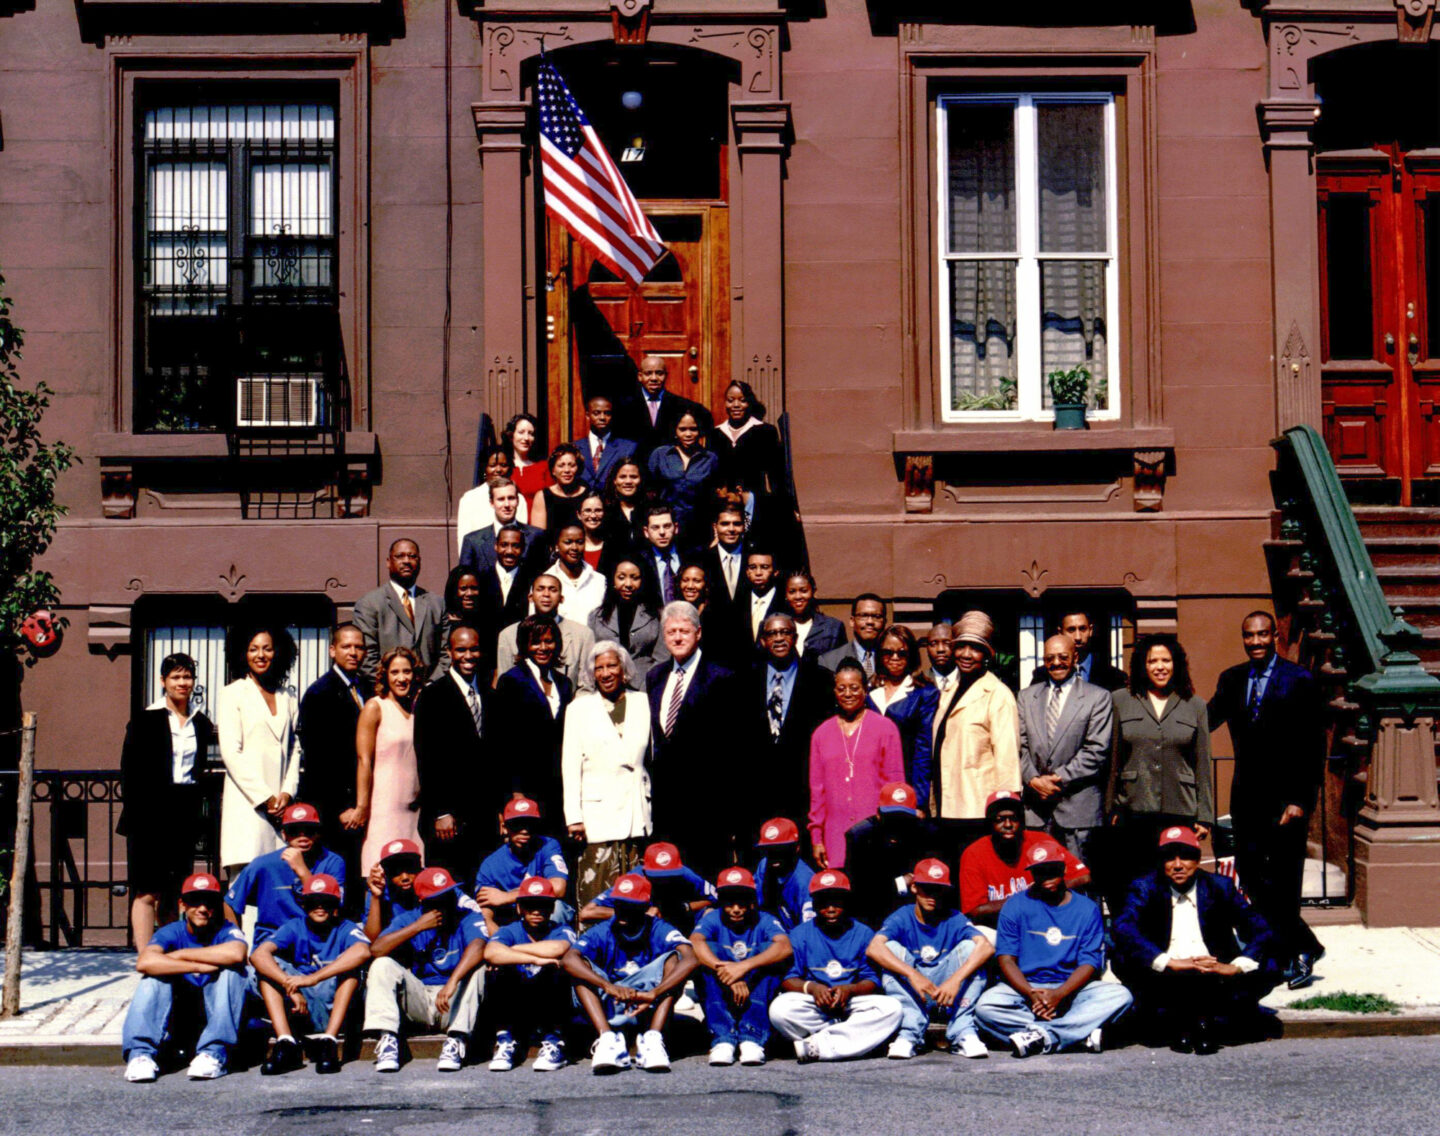 President Clinton takes a photo with members of the Harlem Small Business Initiative in New York